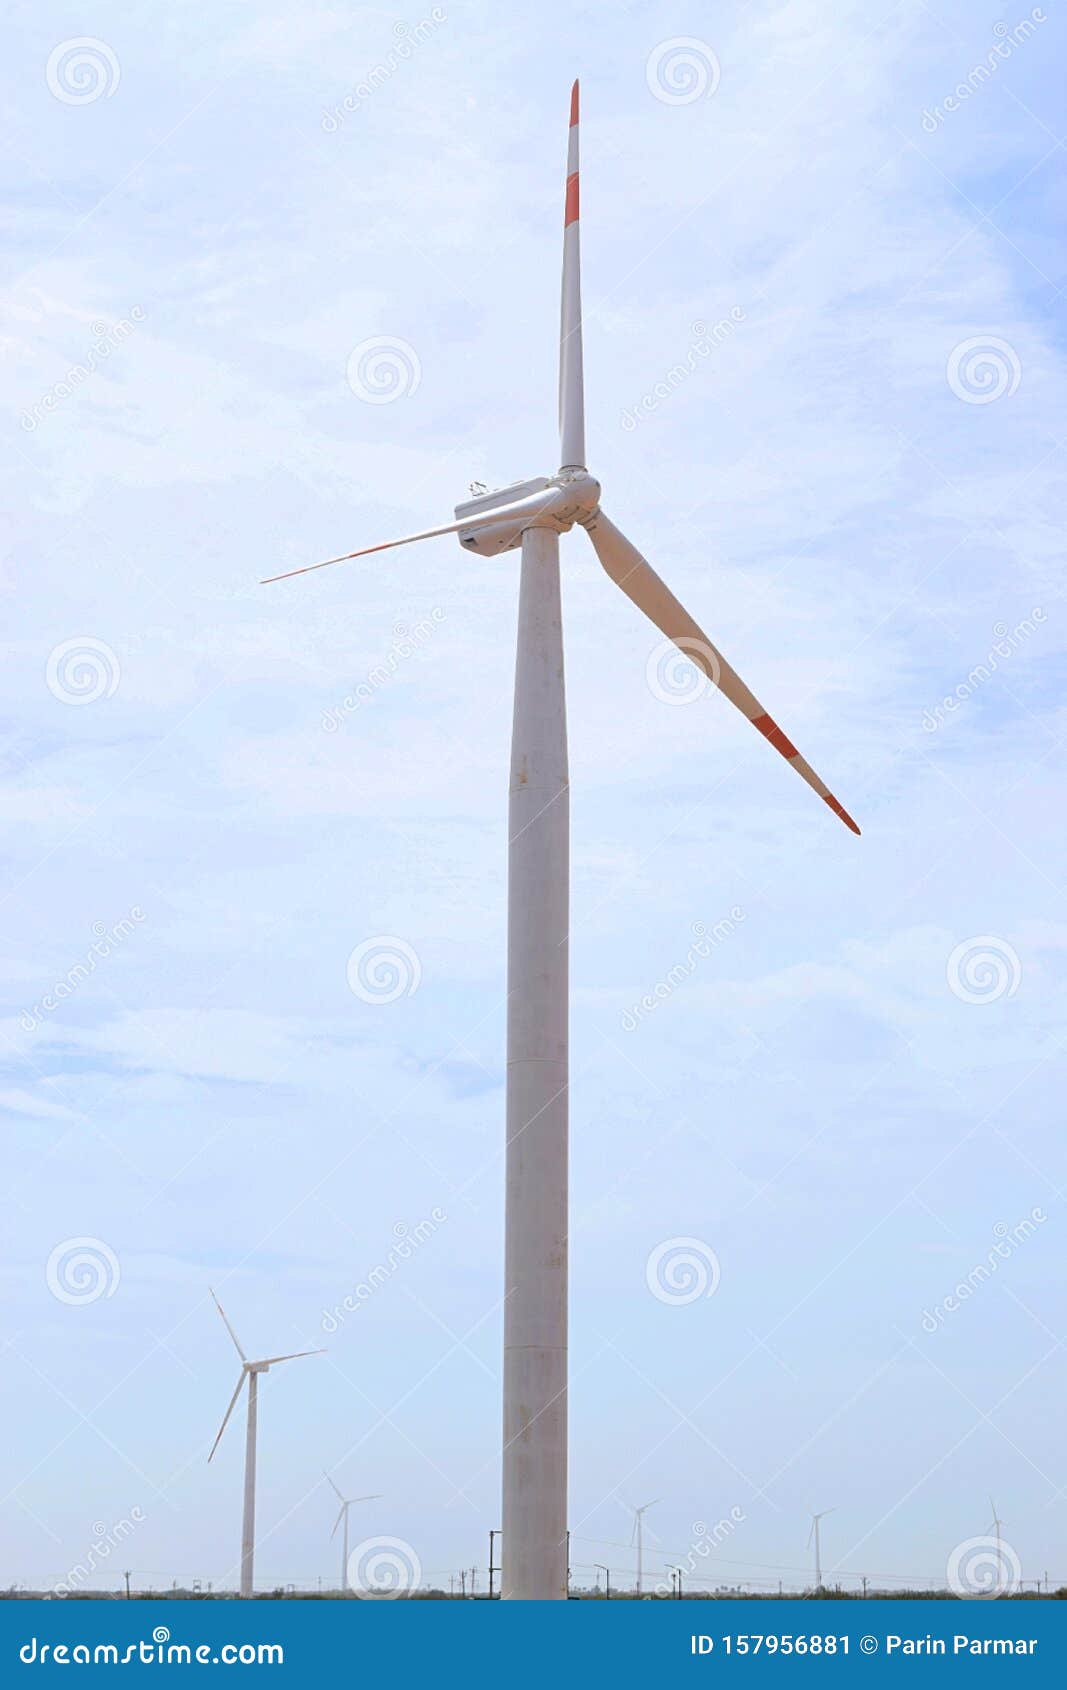 Horizontal Axis Wind Turbine HAWT in Wind Farm - Sustainable and Renewable  Energy - Earth Environment Conservation - Wind Power Stock Image - Image of  environment, large: 157956881